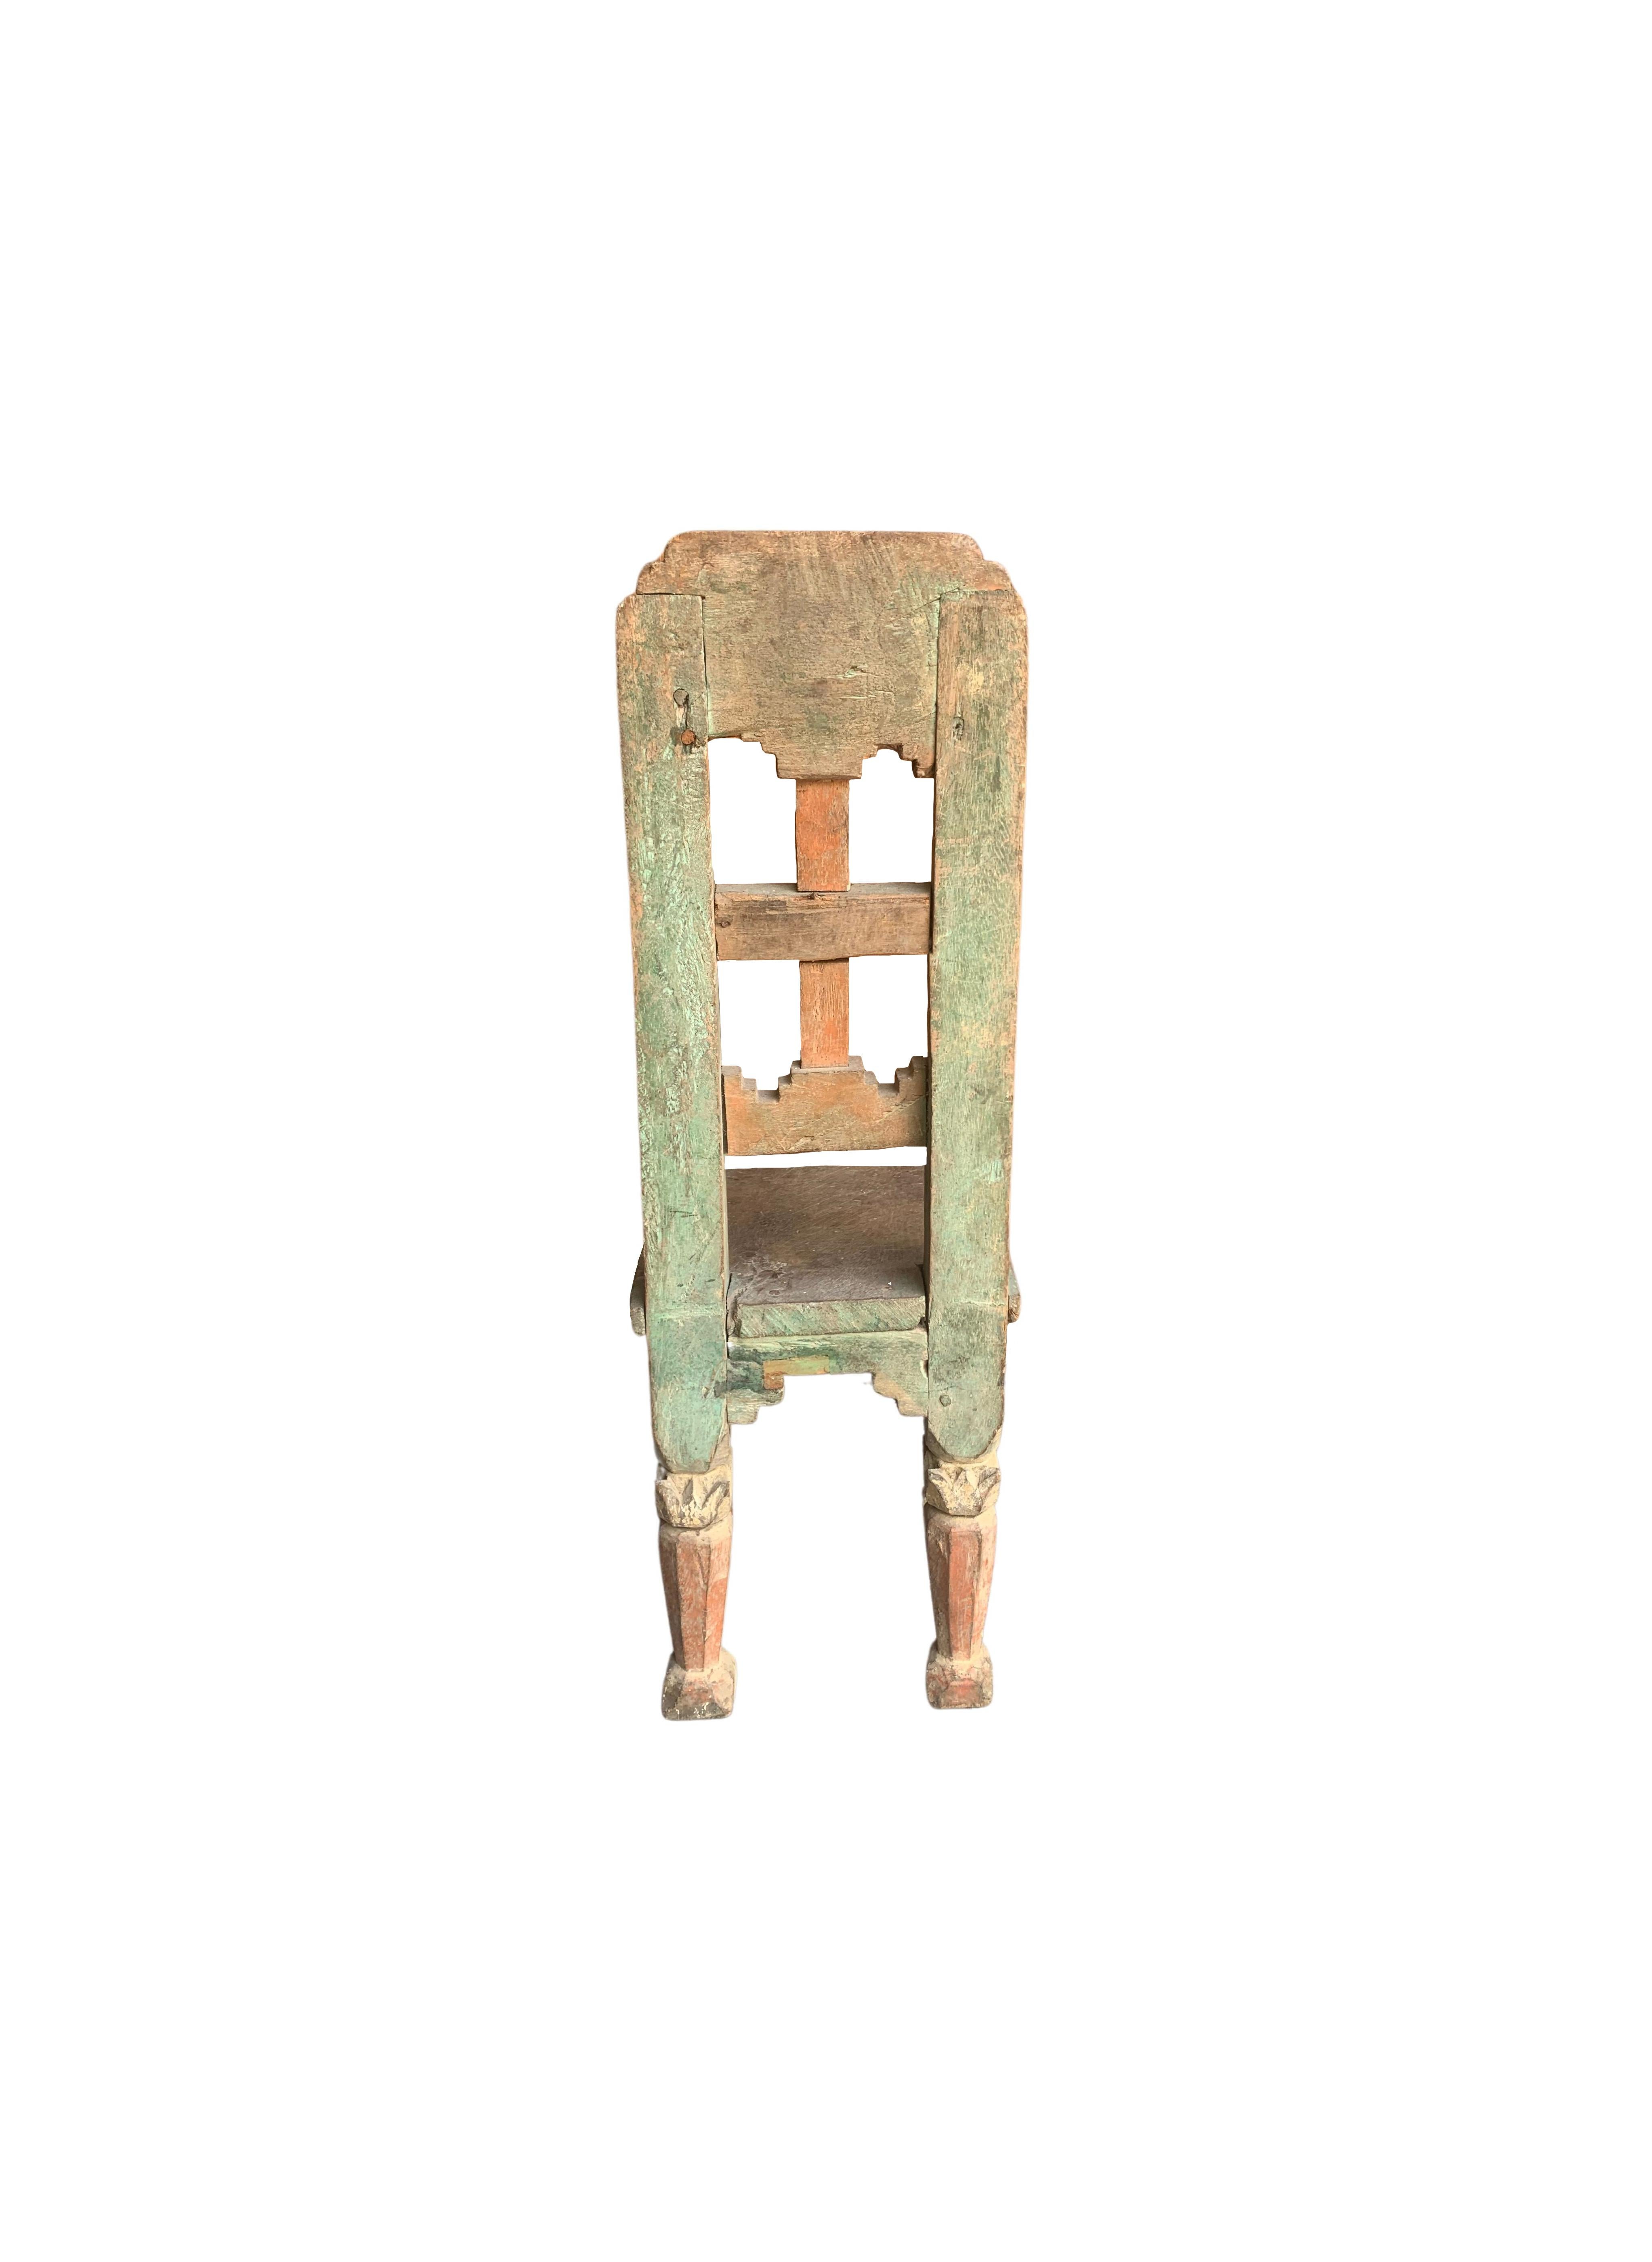 Hand-Crafted Wooden Tobacco Plantation Mini Chair, Java, Indonesia, c. 1900 For Sale